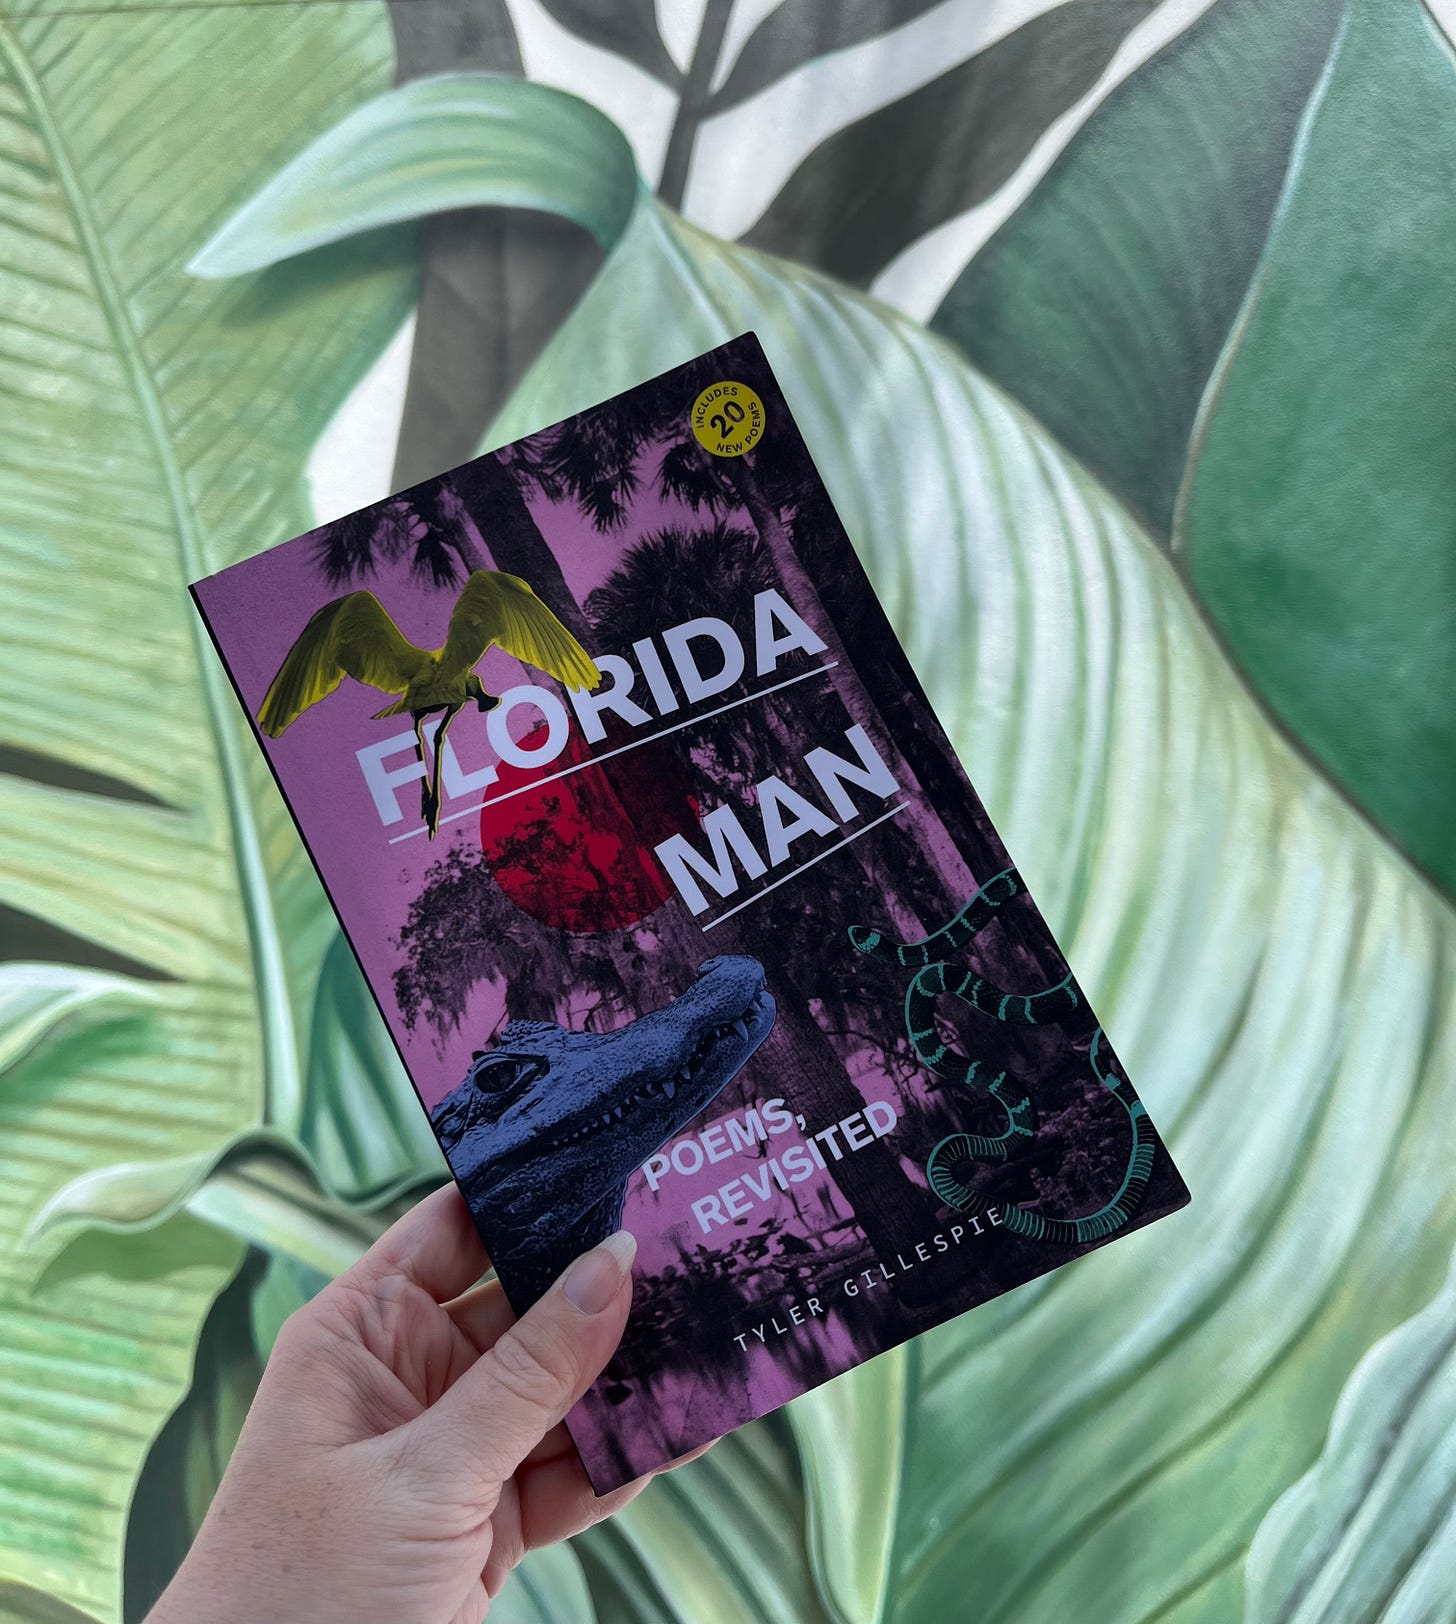 My hand holding up a copy of Florida Man, a poetry collection by Tyler Gillespie, that has a pink cover with a collage of various Florida imagery like palm trees, a bird, a gator, etc.